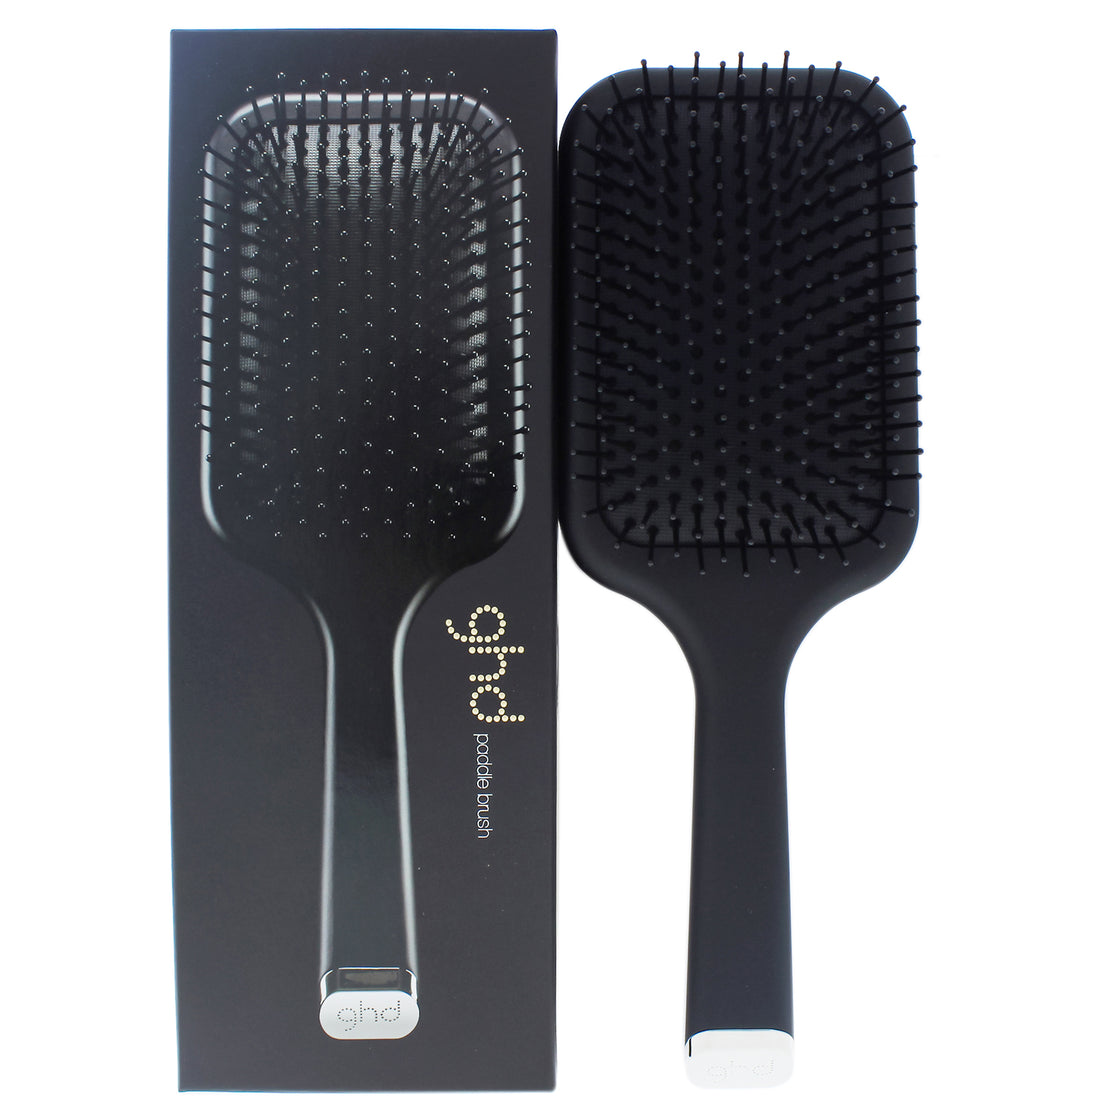 Paddle Brush by GHD for Unisex - 1 Pc Hair Brush